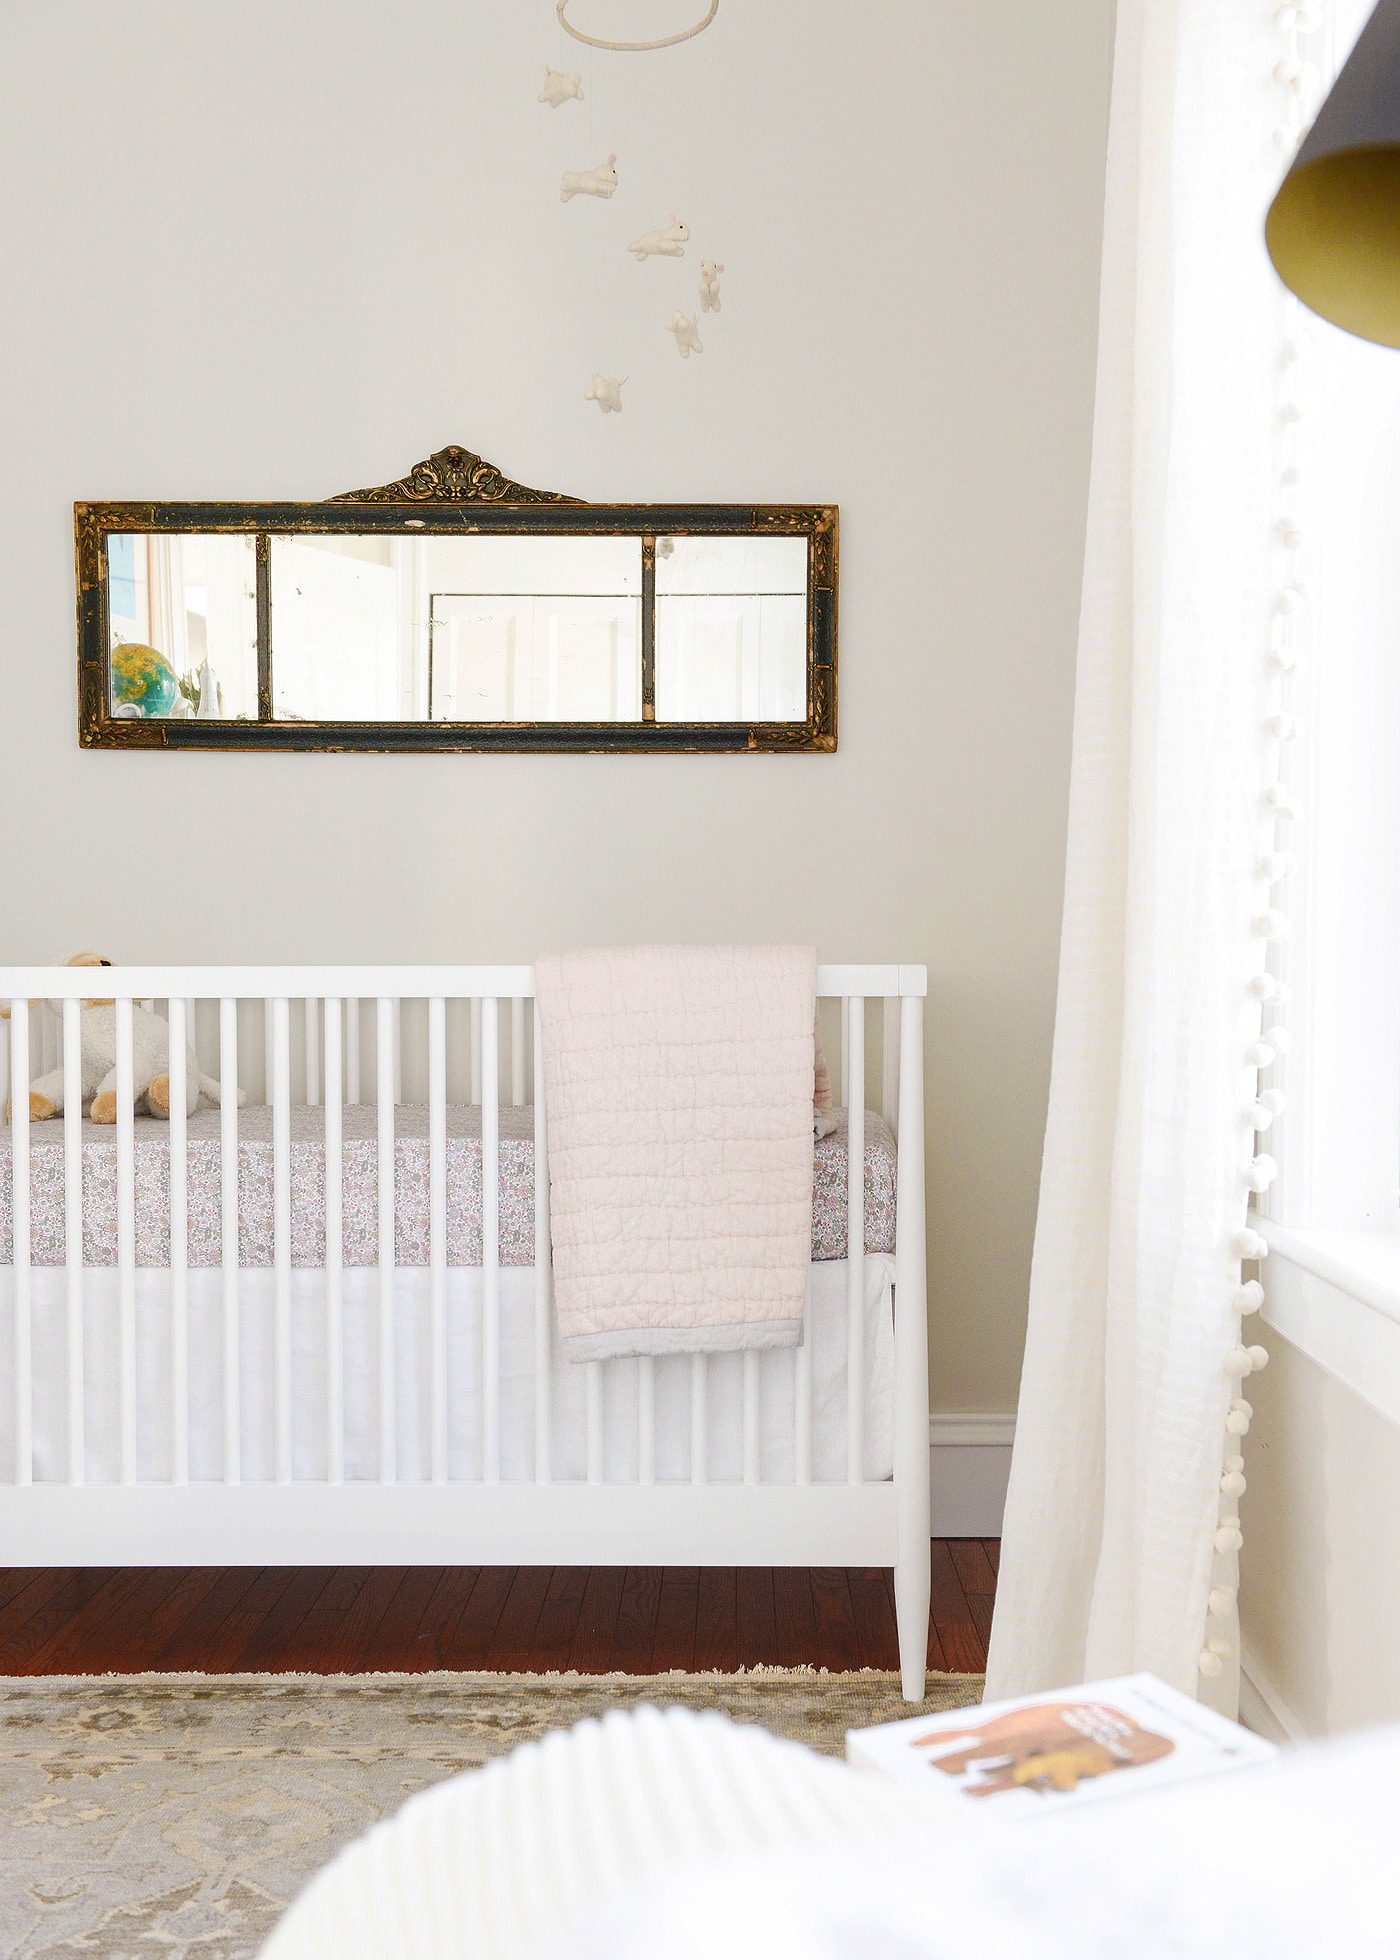 The Design Tool That Shaped Our Teeny Nursery